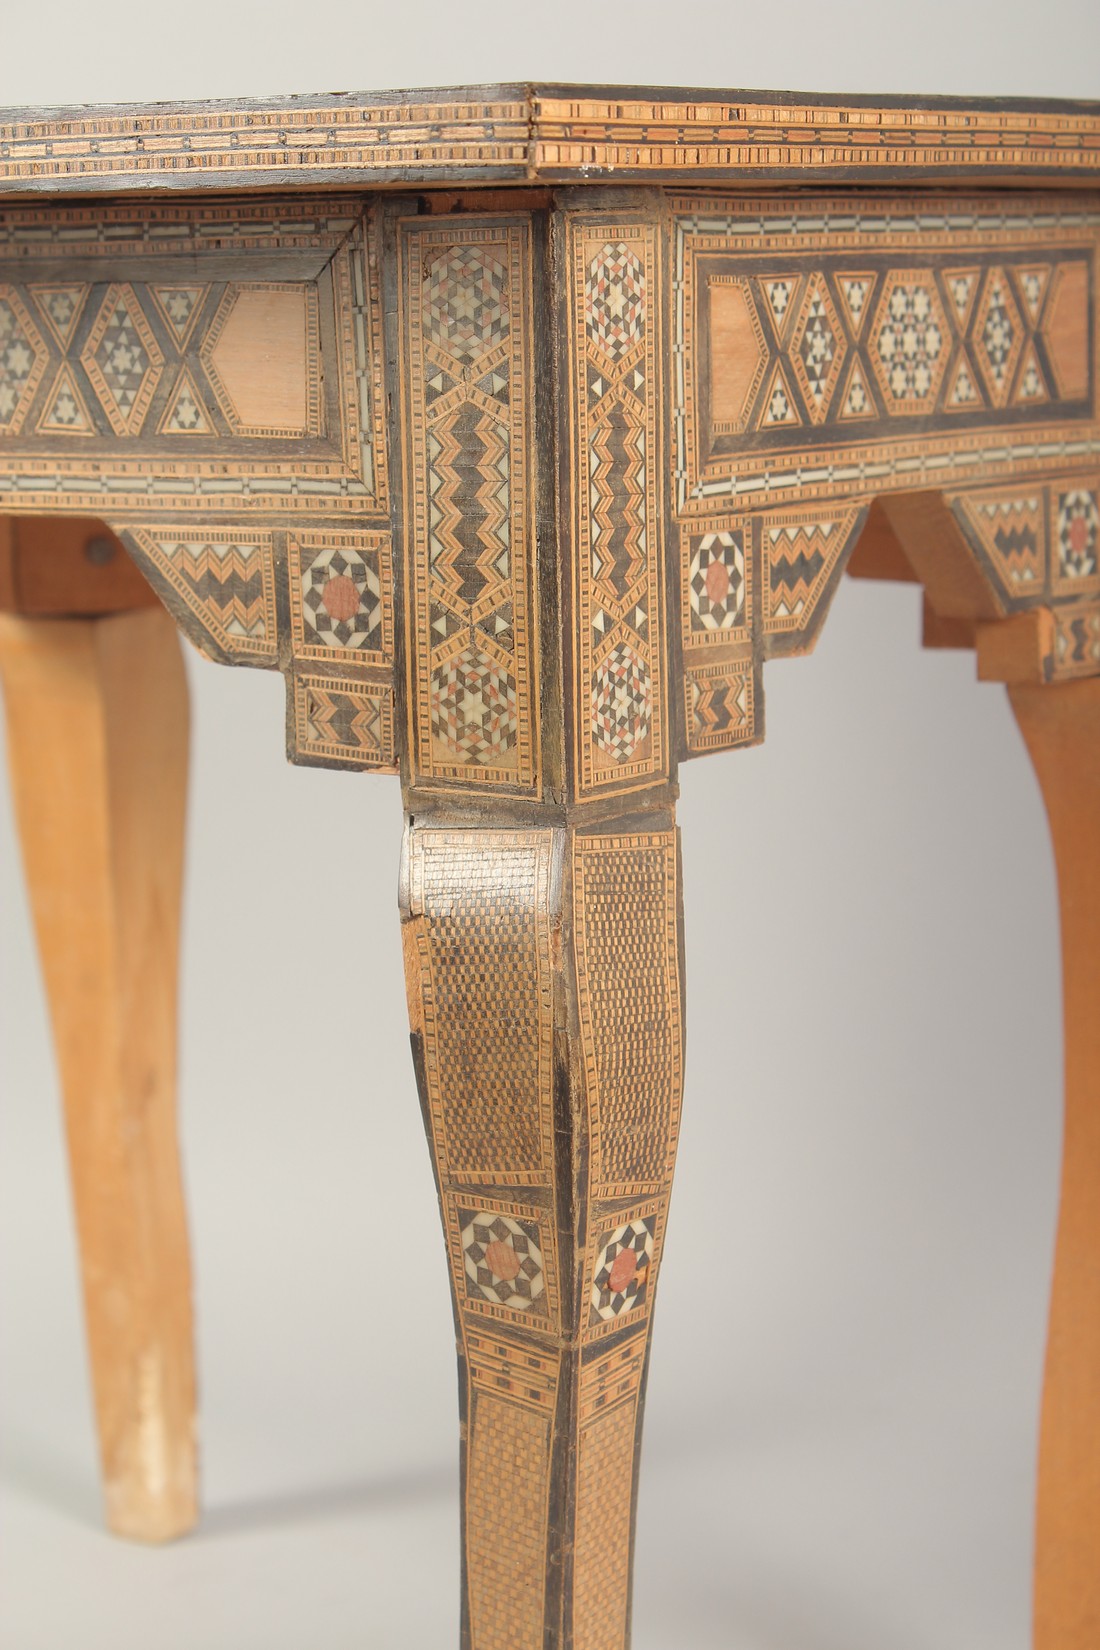 A VERY FINE SYRIAN DAMASCUS BONE INLAID WOODEN TABLE, circa 1900-1920, finely onlaid with - Image 3 of 4